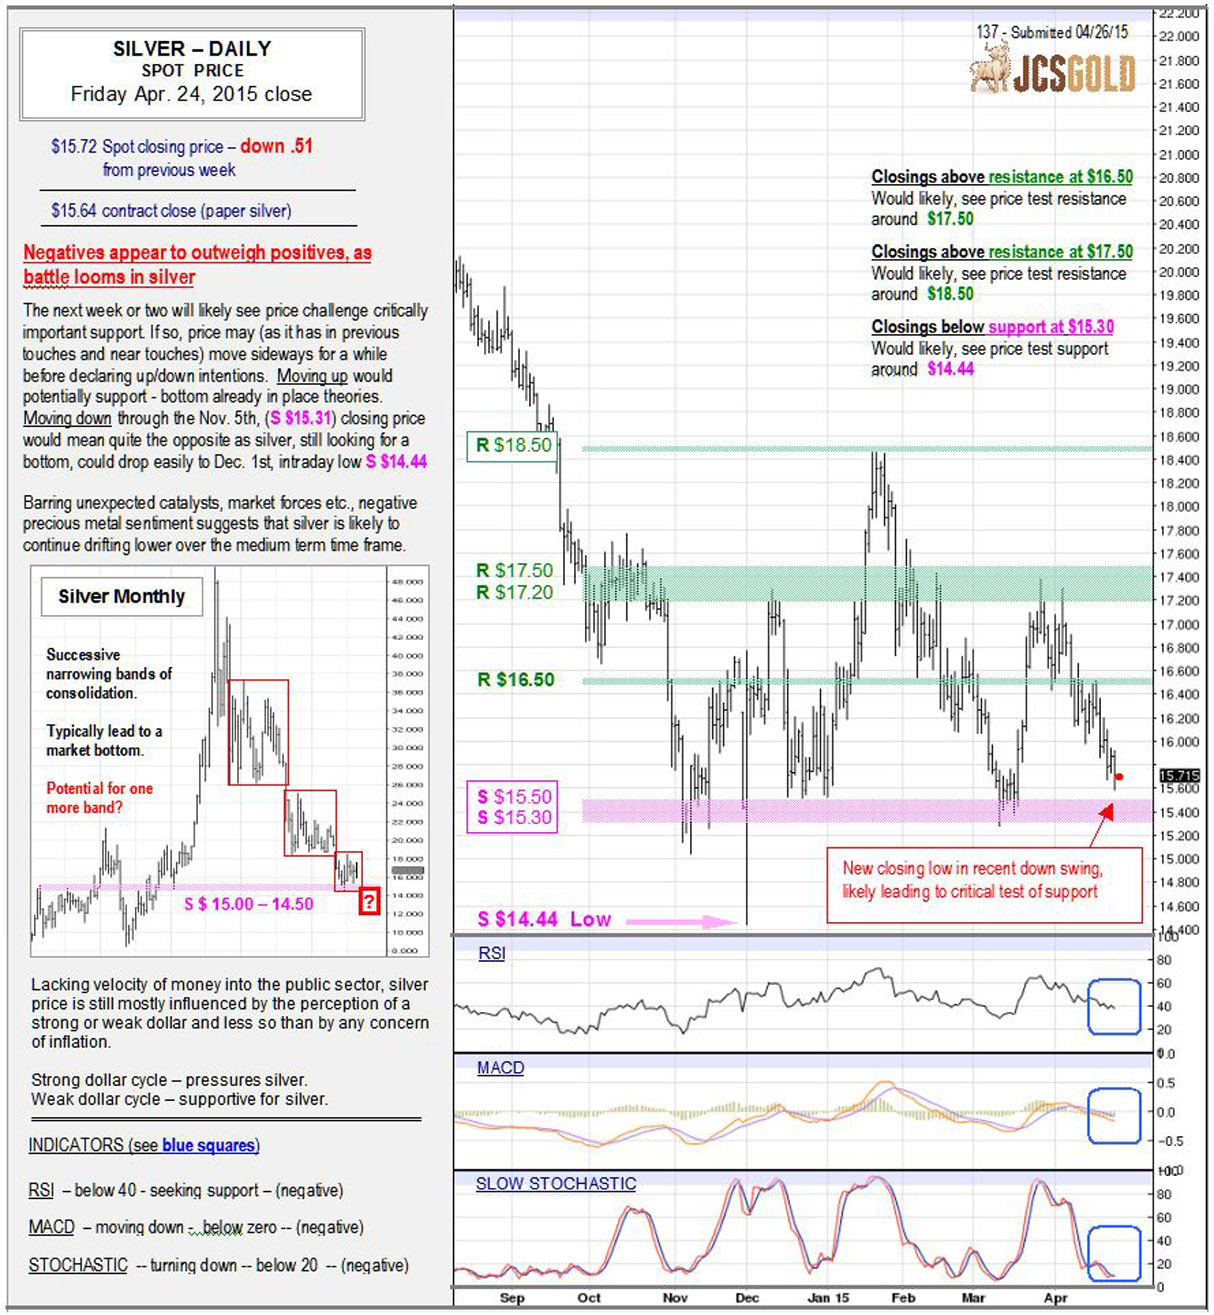 Apr 24, 2015 chart & commentary